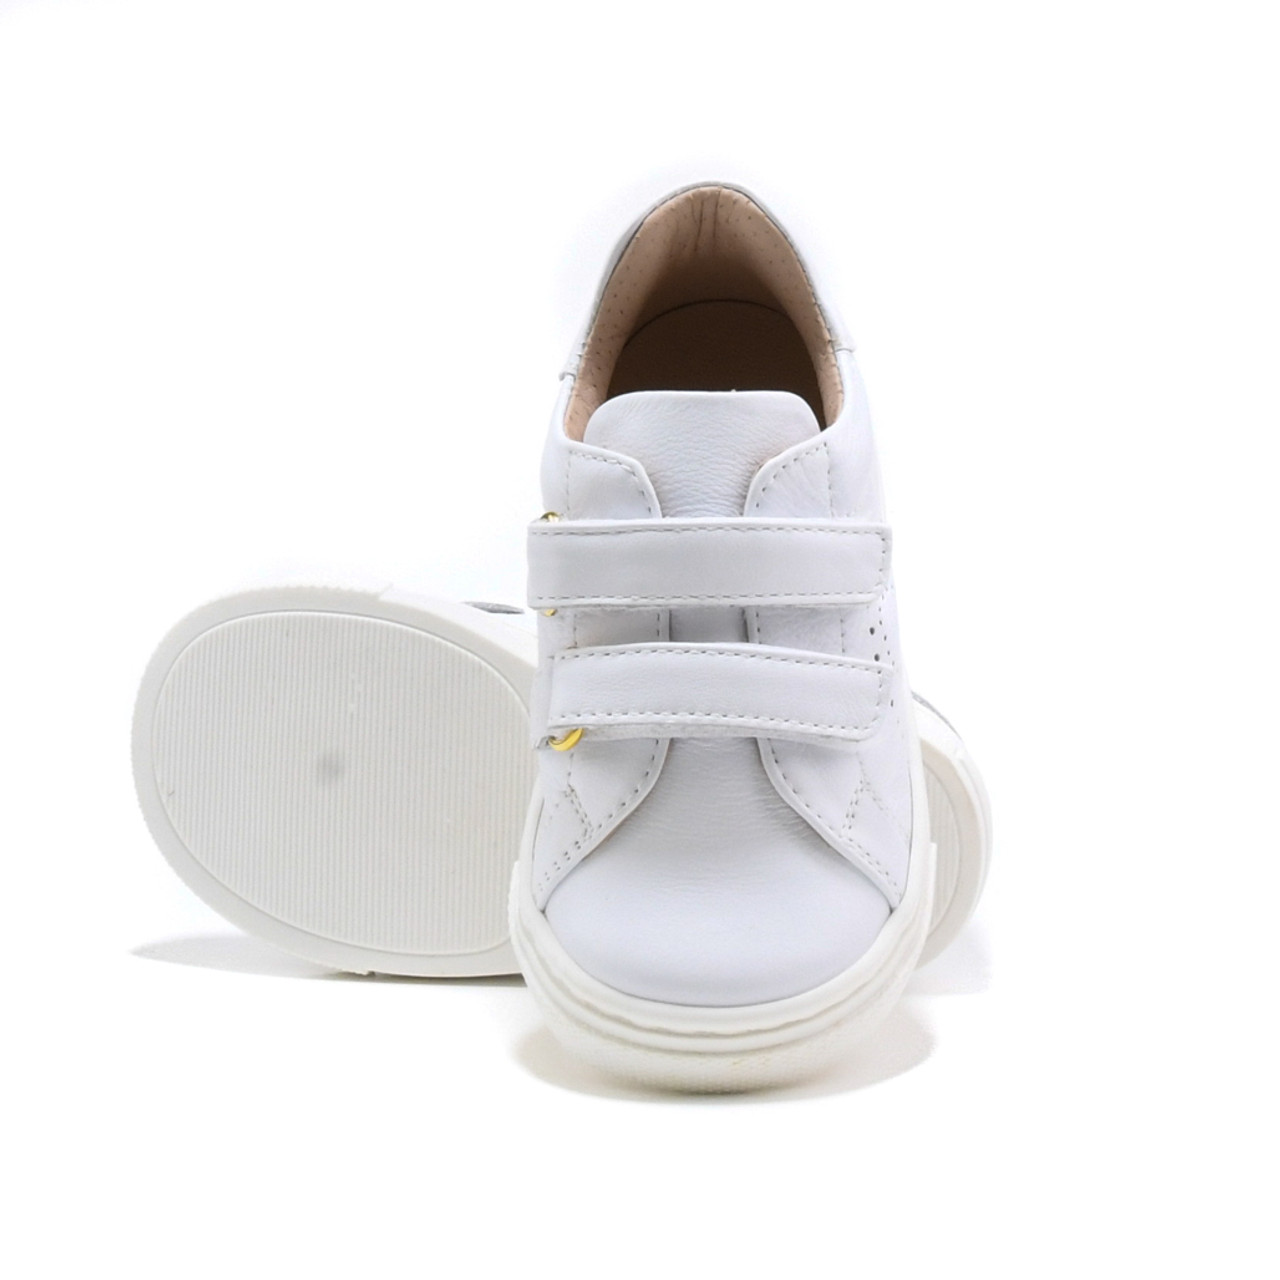 FLORENS Le PICCOLE White Sneakers for Girls - Baby Collection | Hera ...